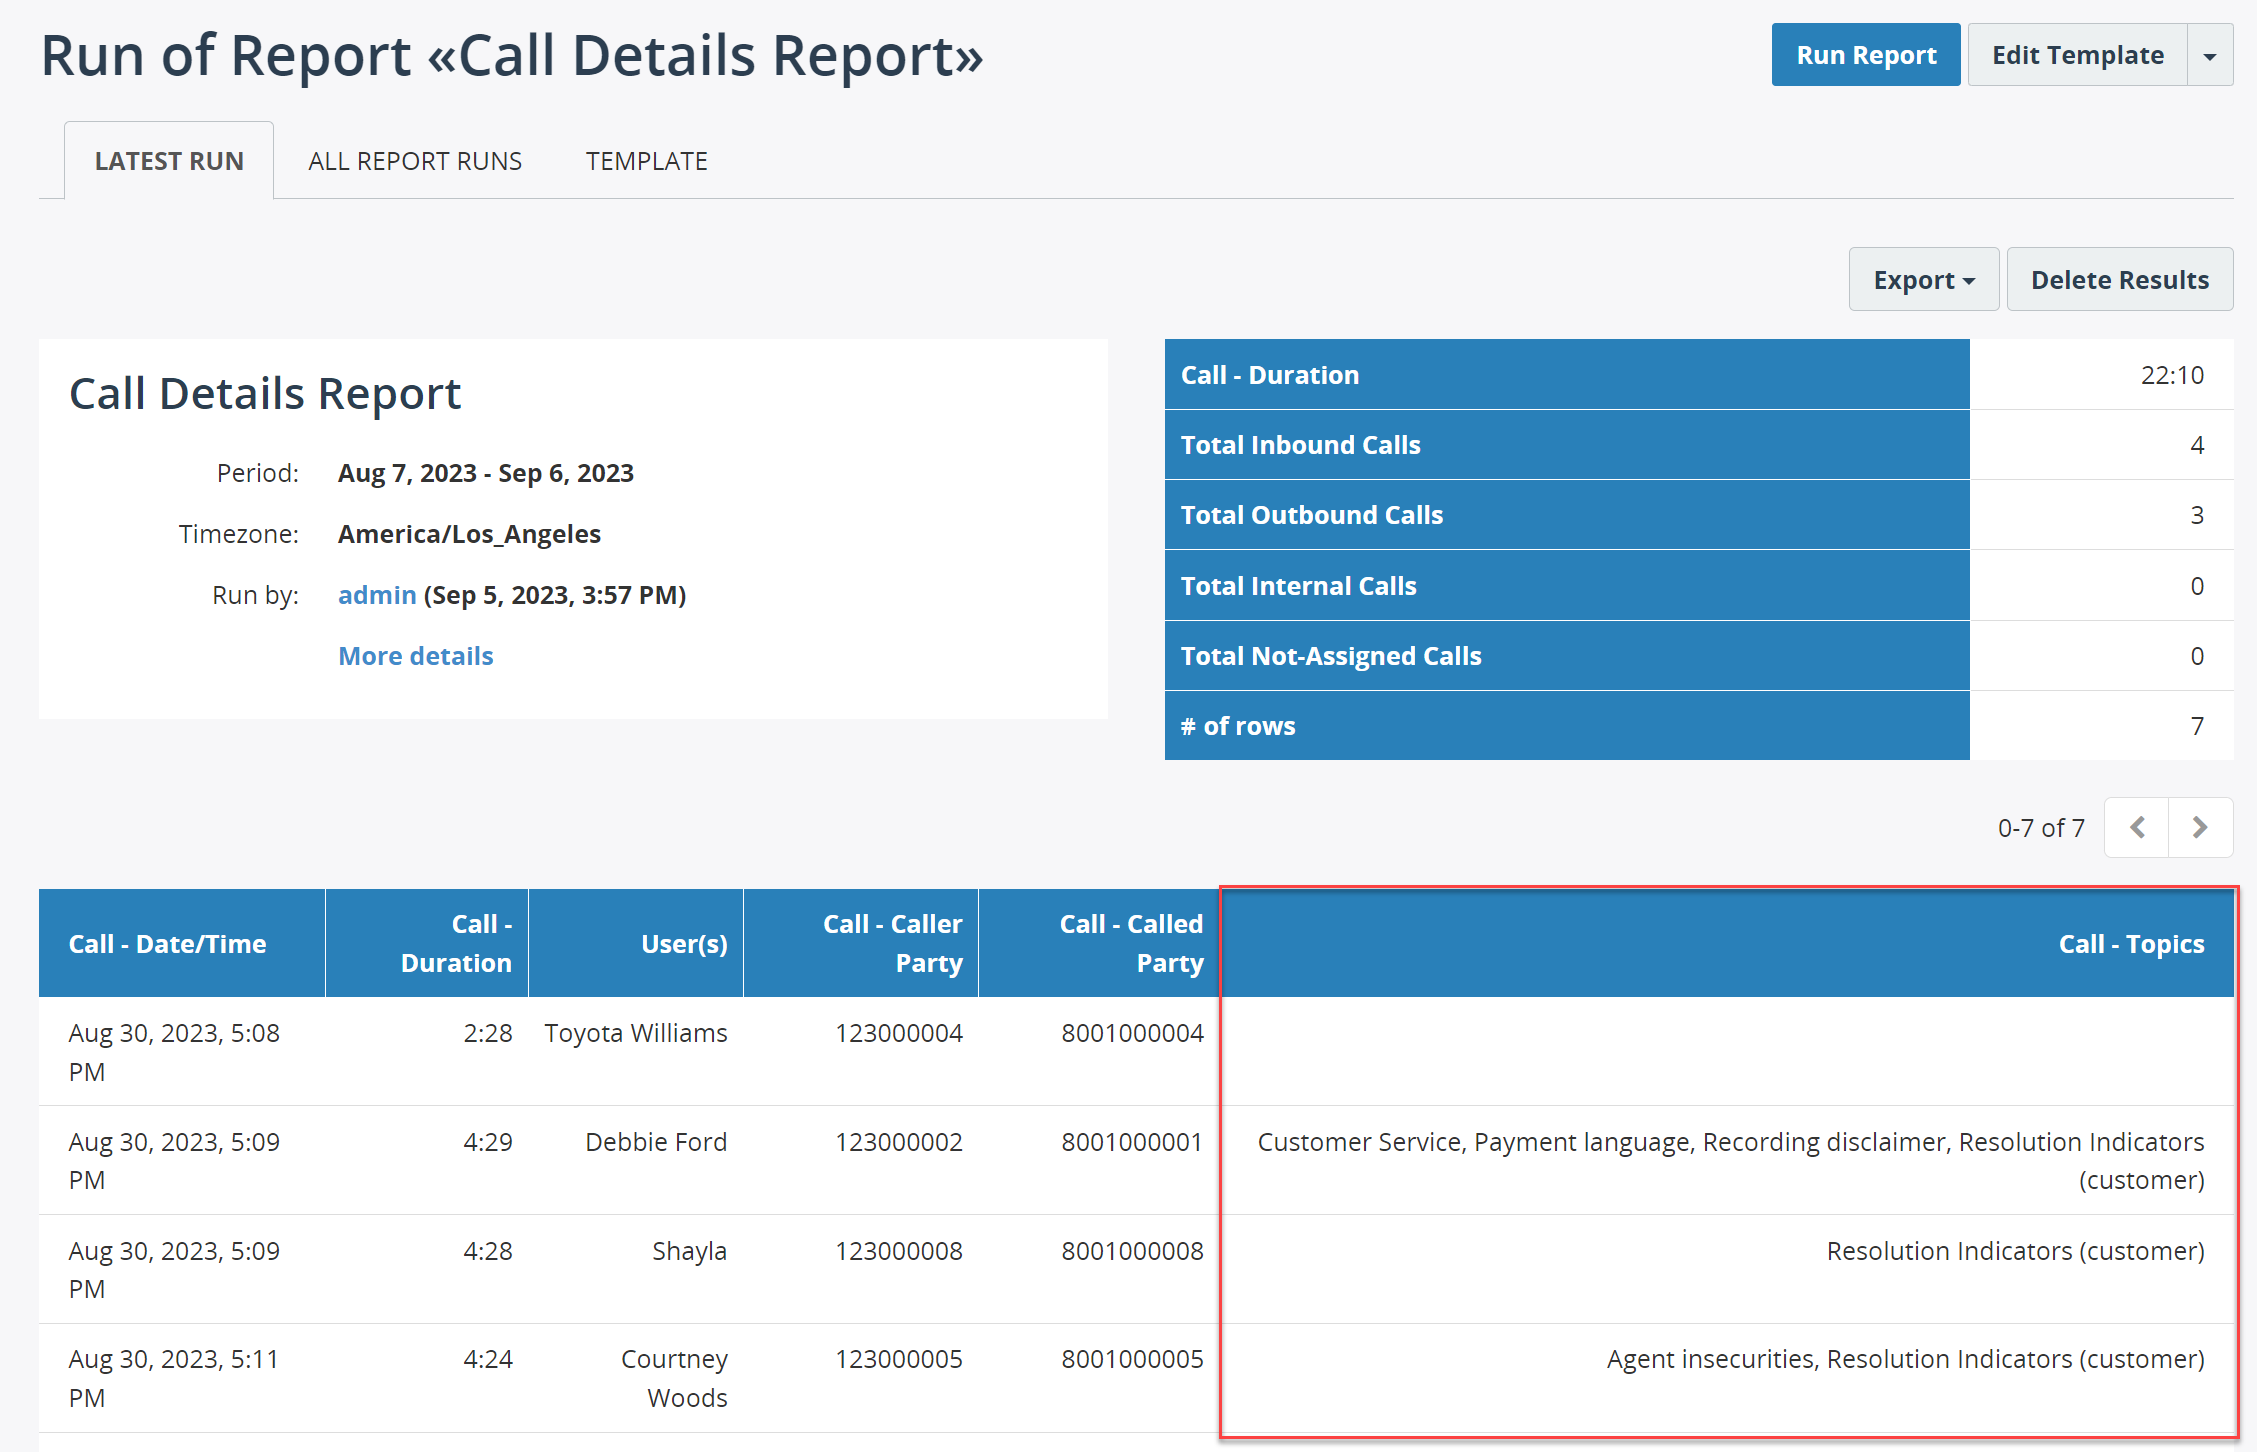 Call Details report with Topics, no counters